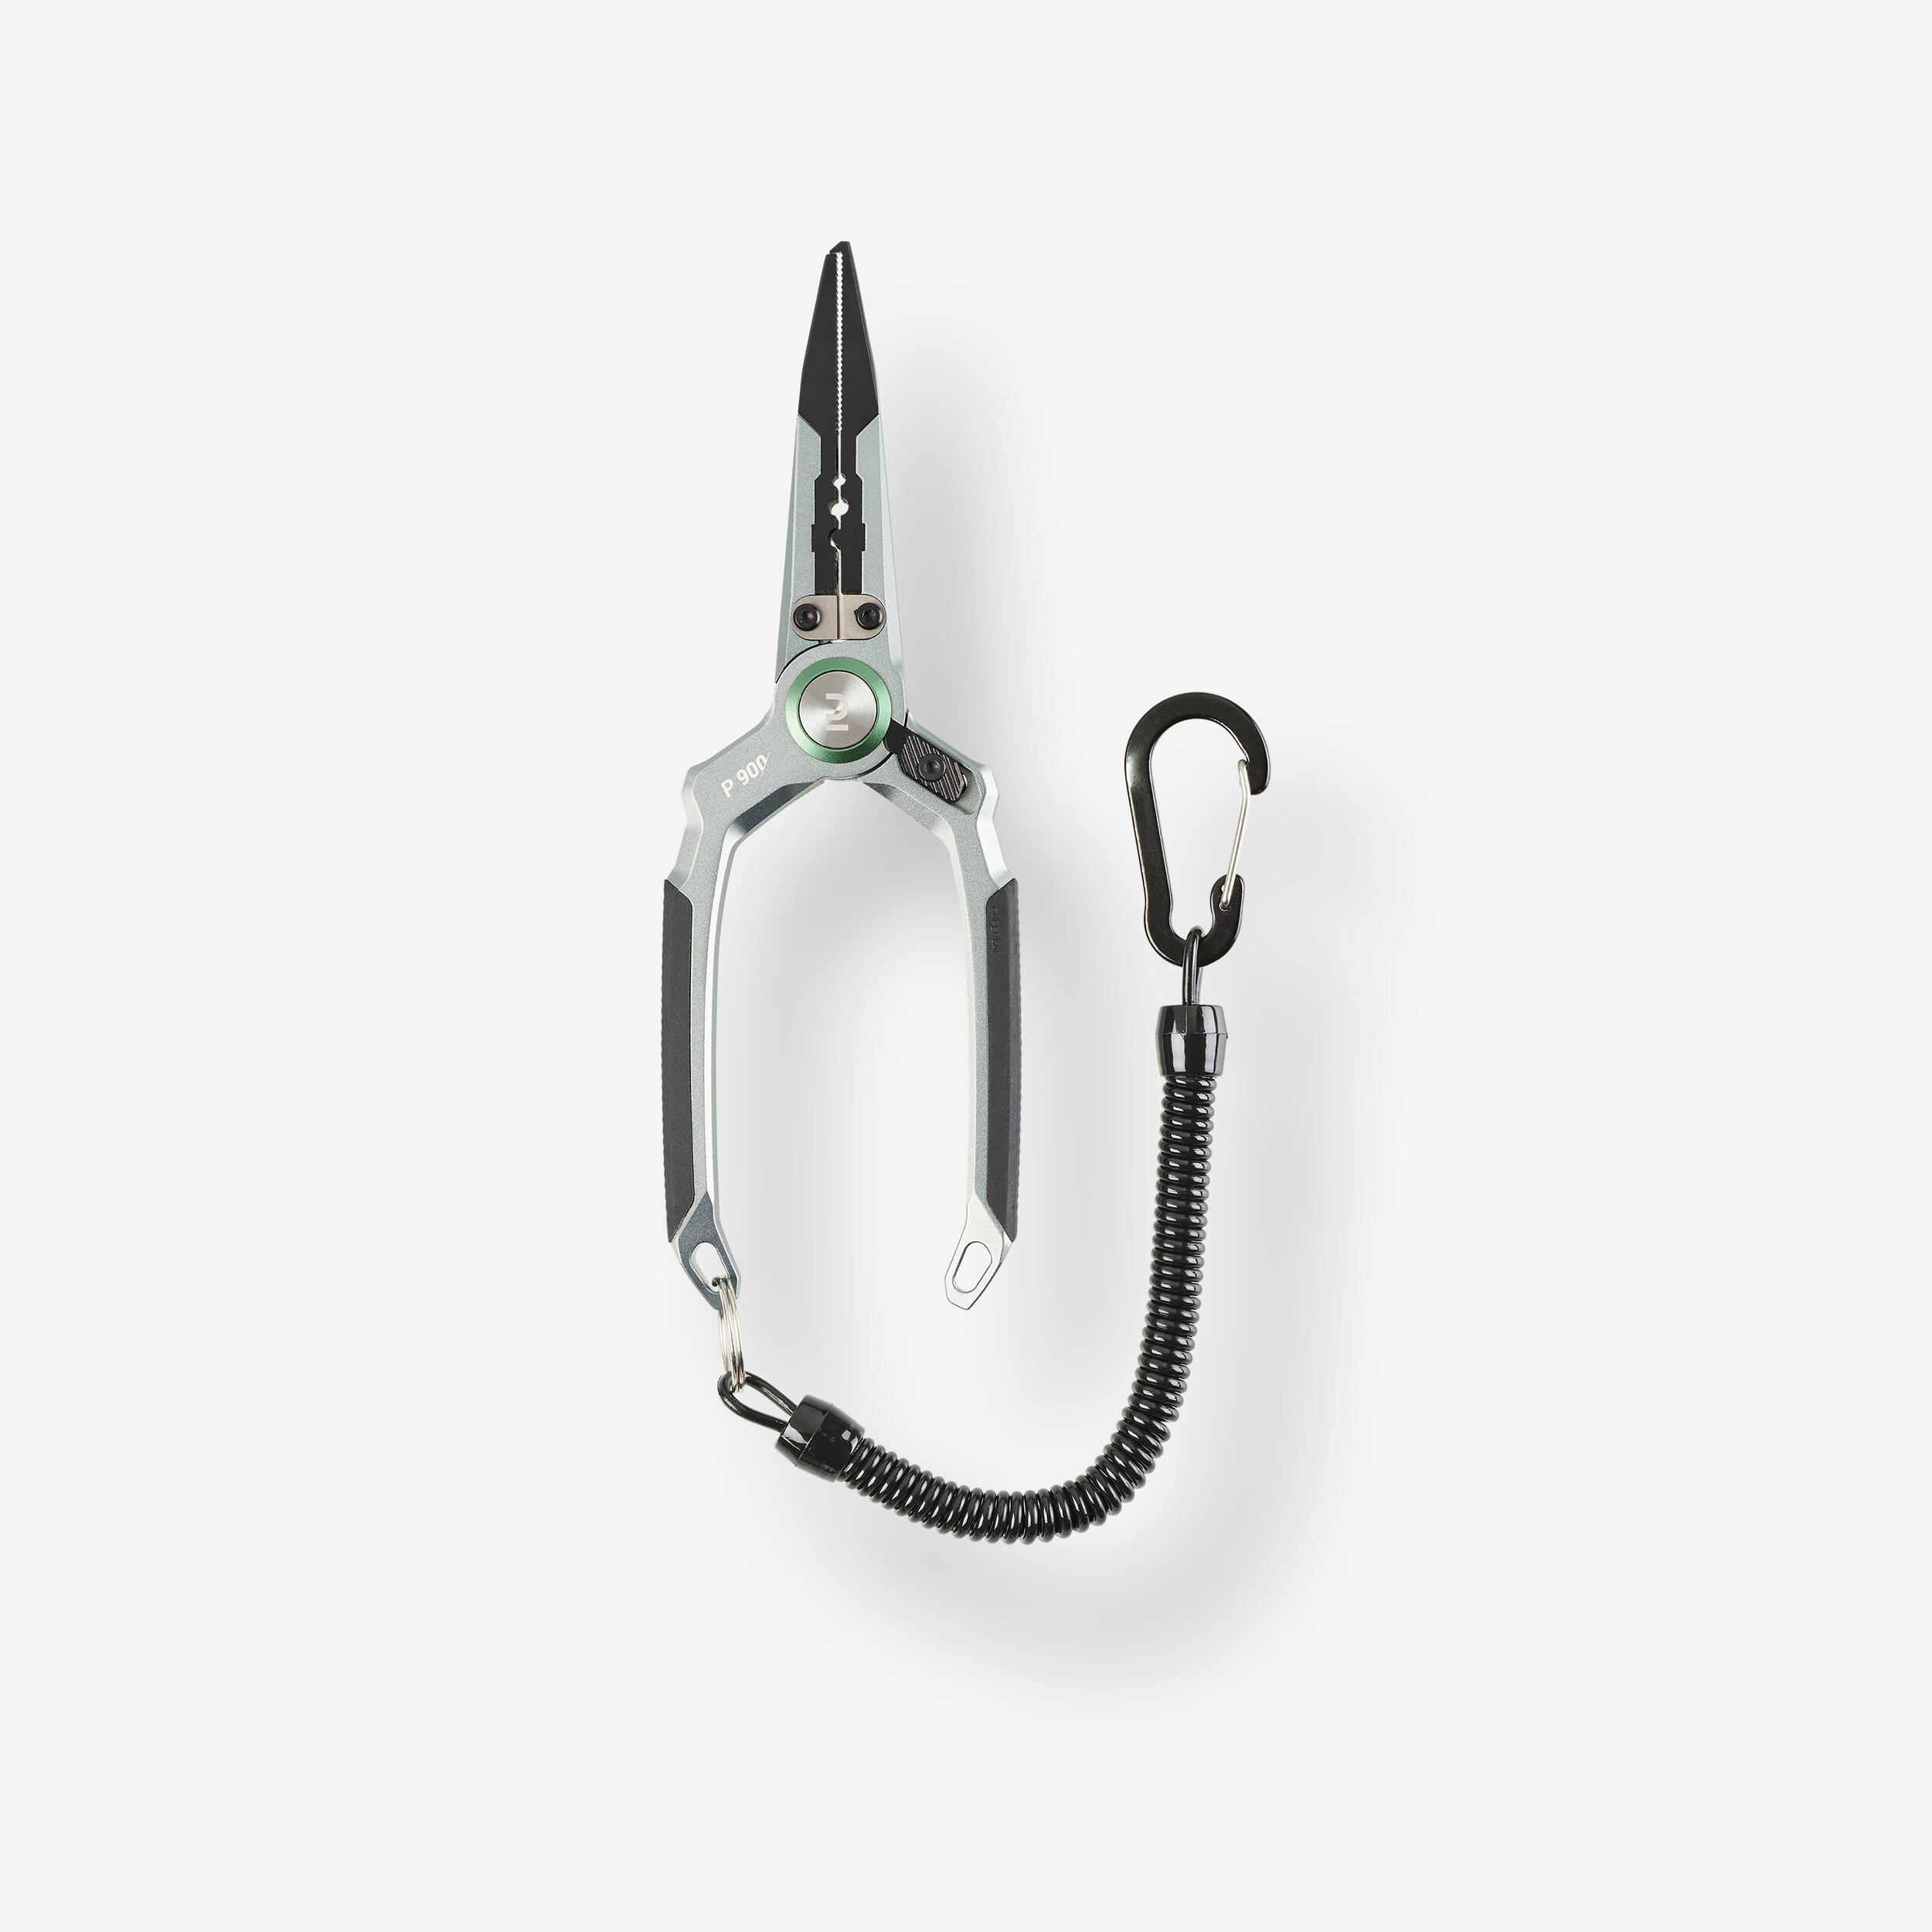 Caperlan Fishing Pliers Light P-900 - One Size